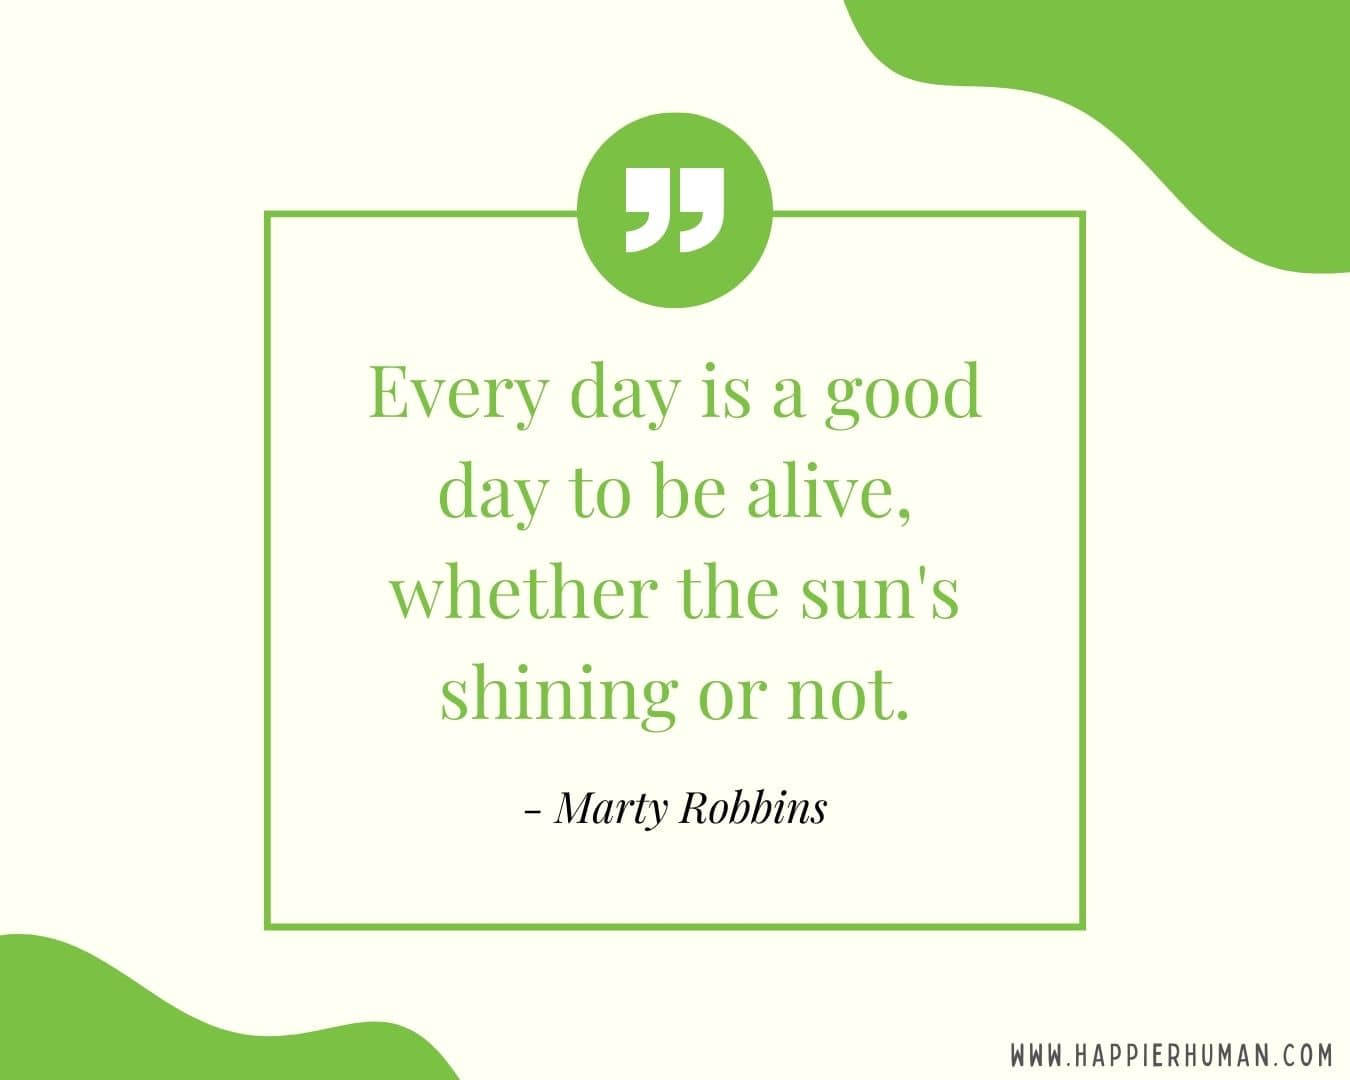 Great Day Quotes - “Every day is a good day to be alive, whether the sun's shining or not.” – Marty Robbins